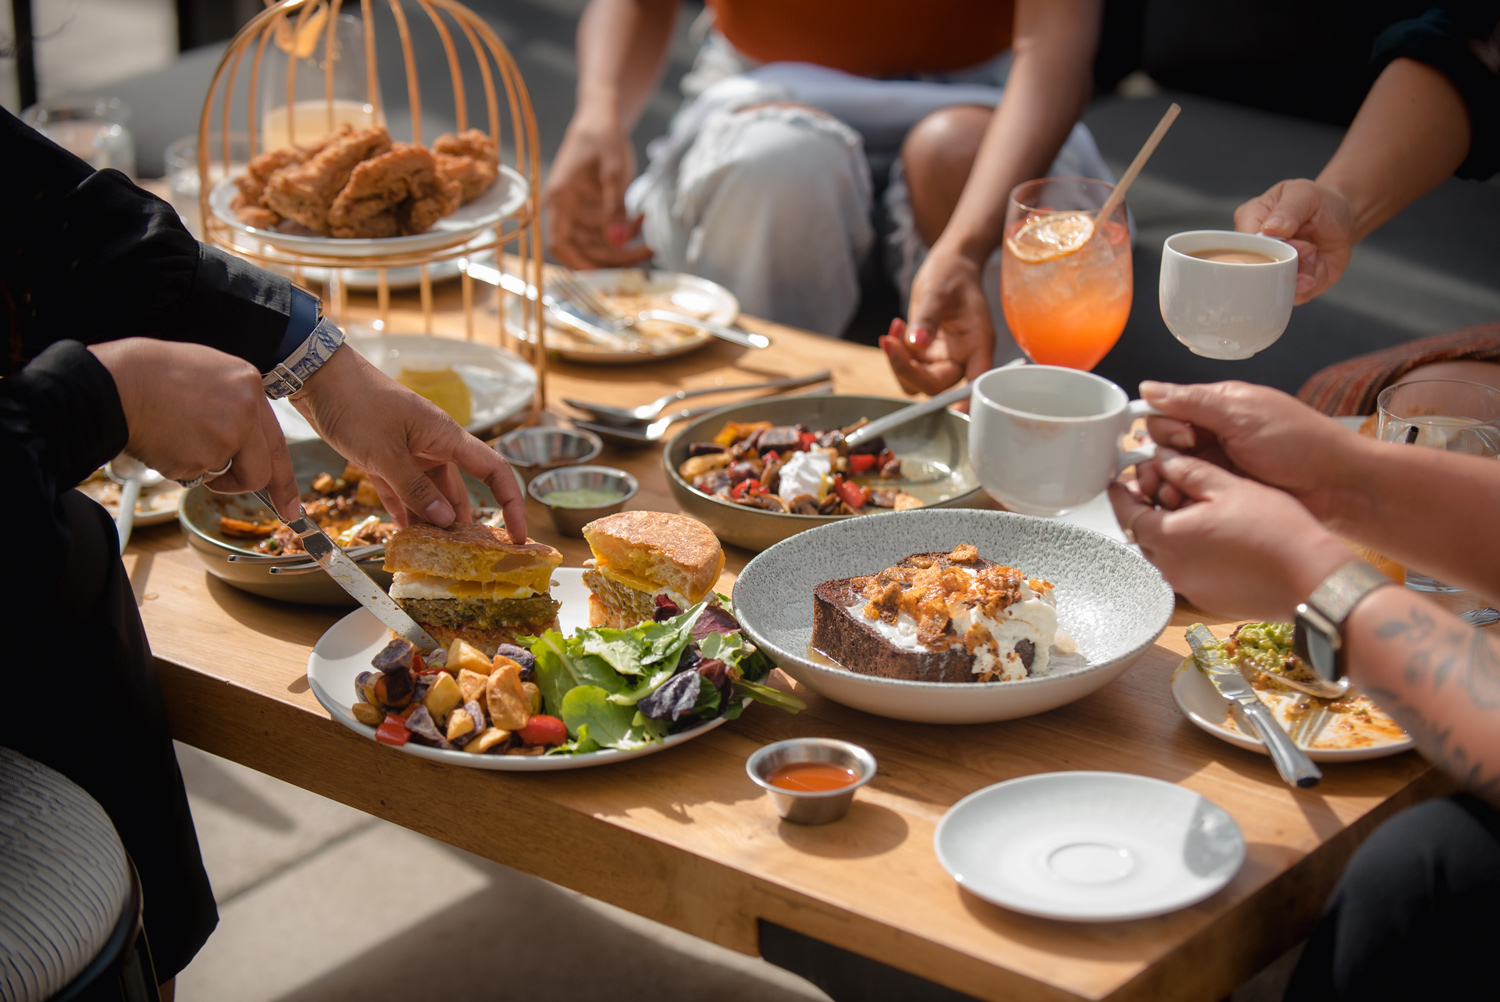 Rooftop brunch dishes and drinks on a table in the sunshine